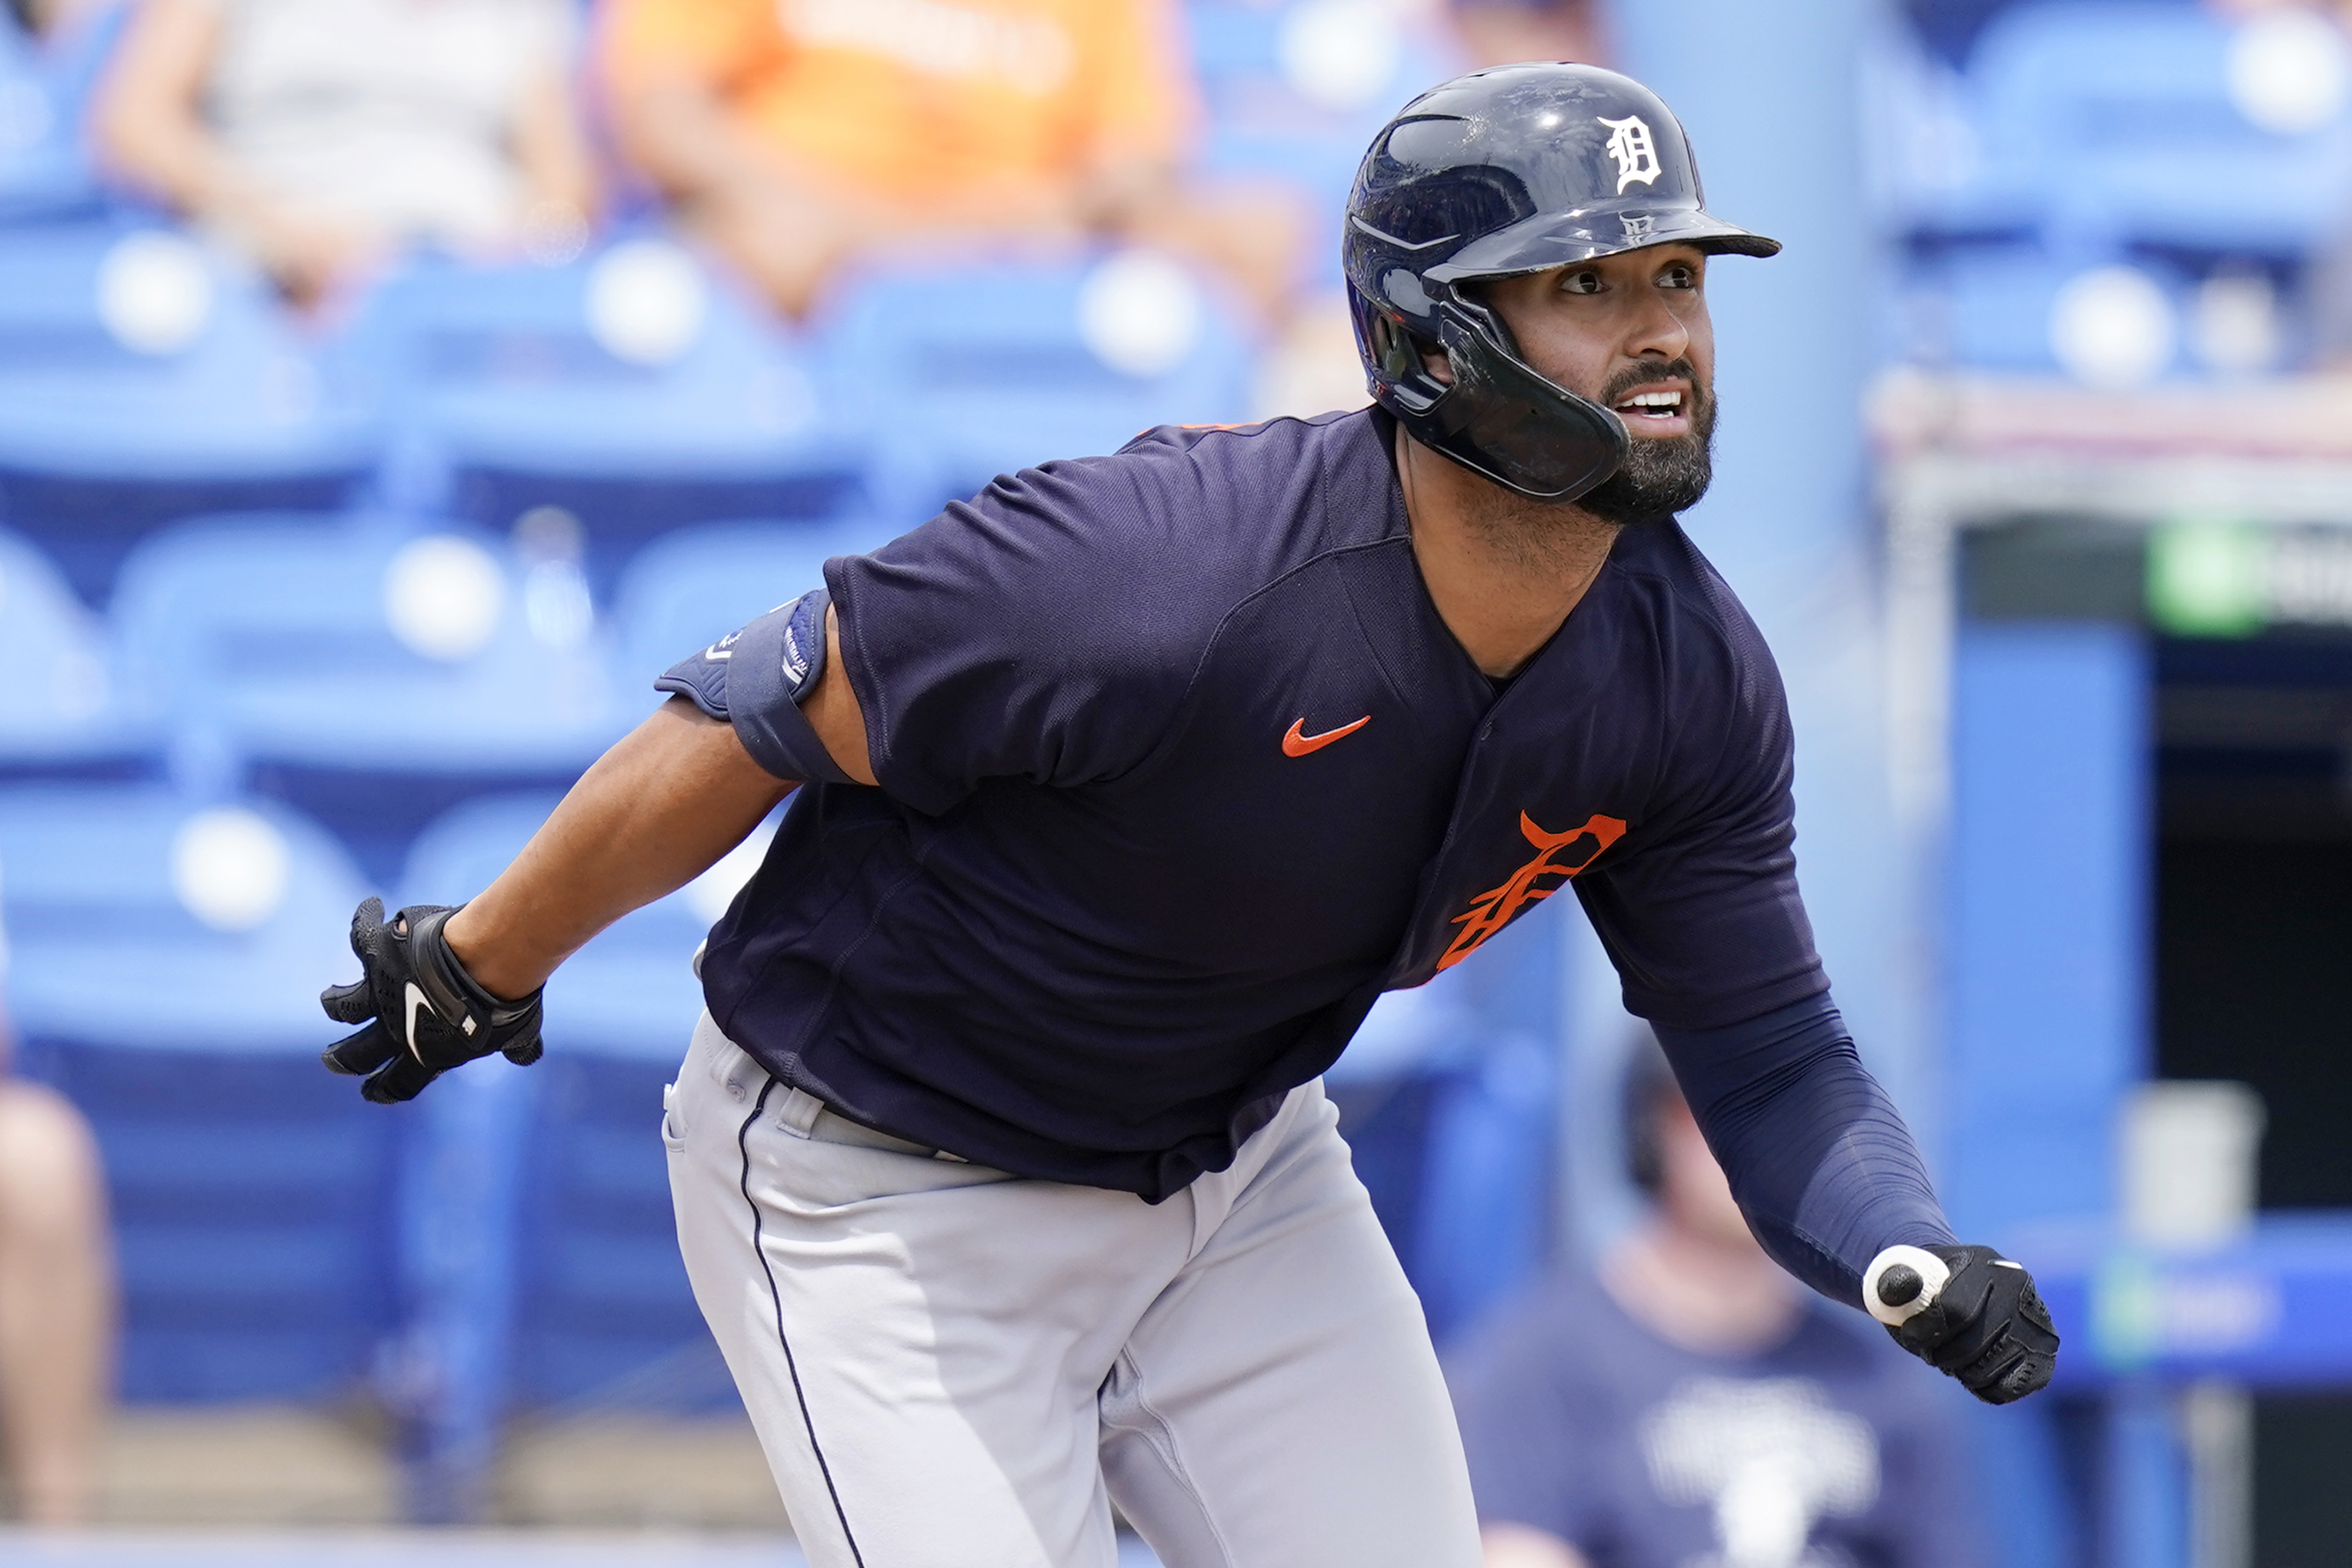 Tigers 3, Twins 0: Riley Greene owns the yard - Bless You Boys